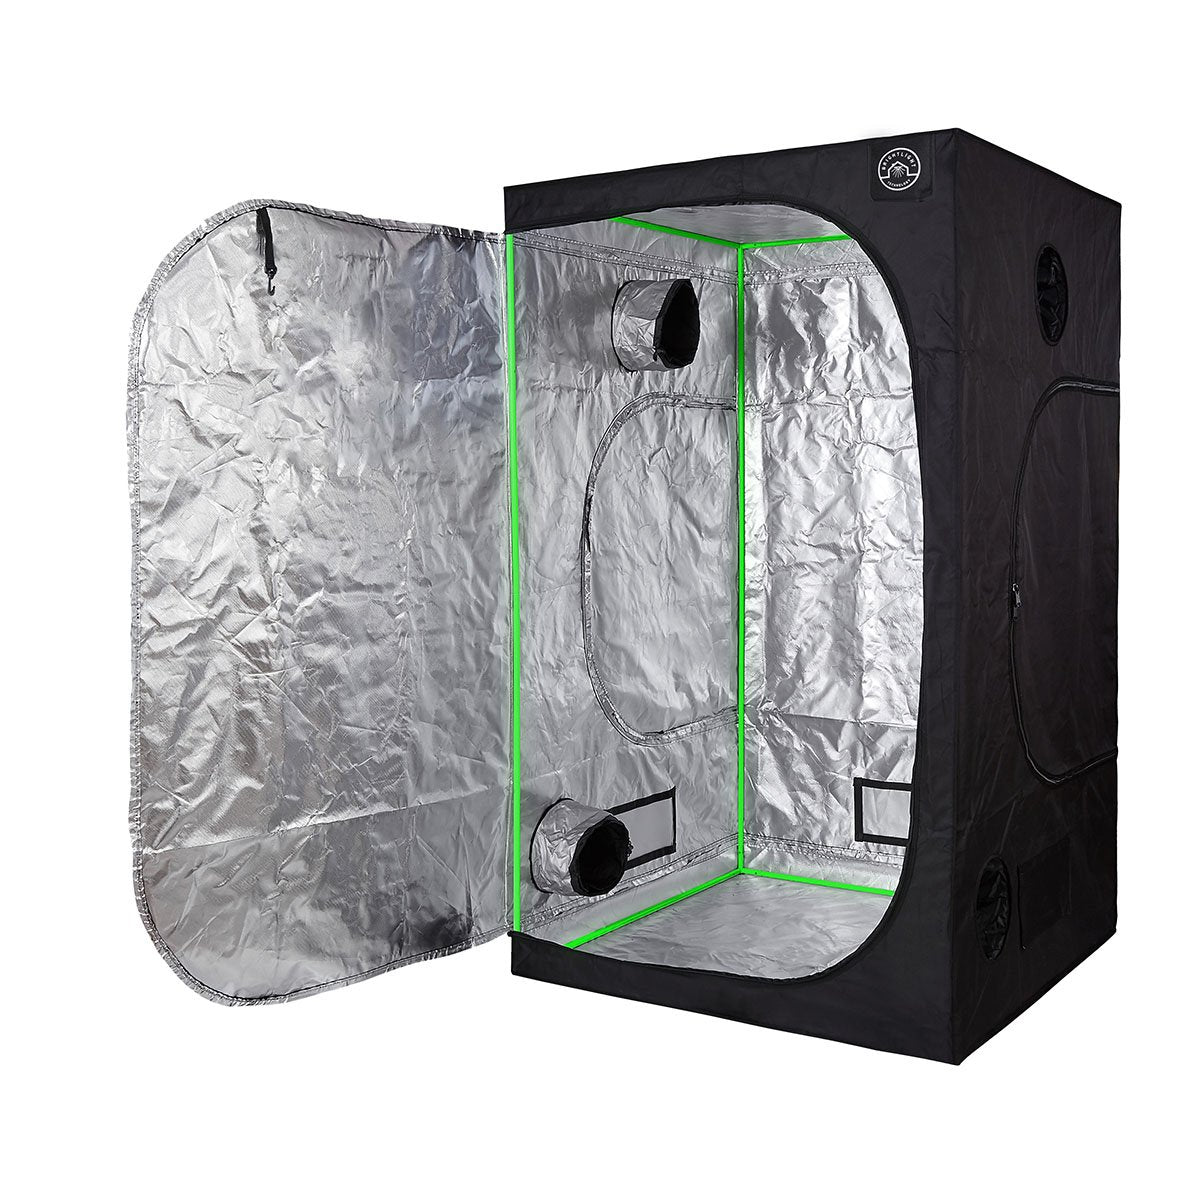 Growbox Completo PRO LED 100x100x200 - ASTROLED 350W